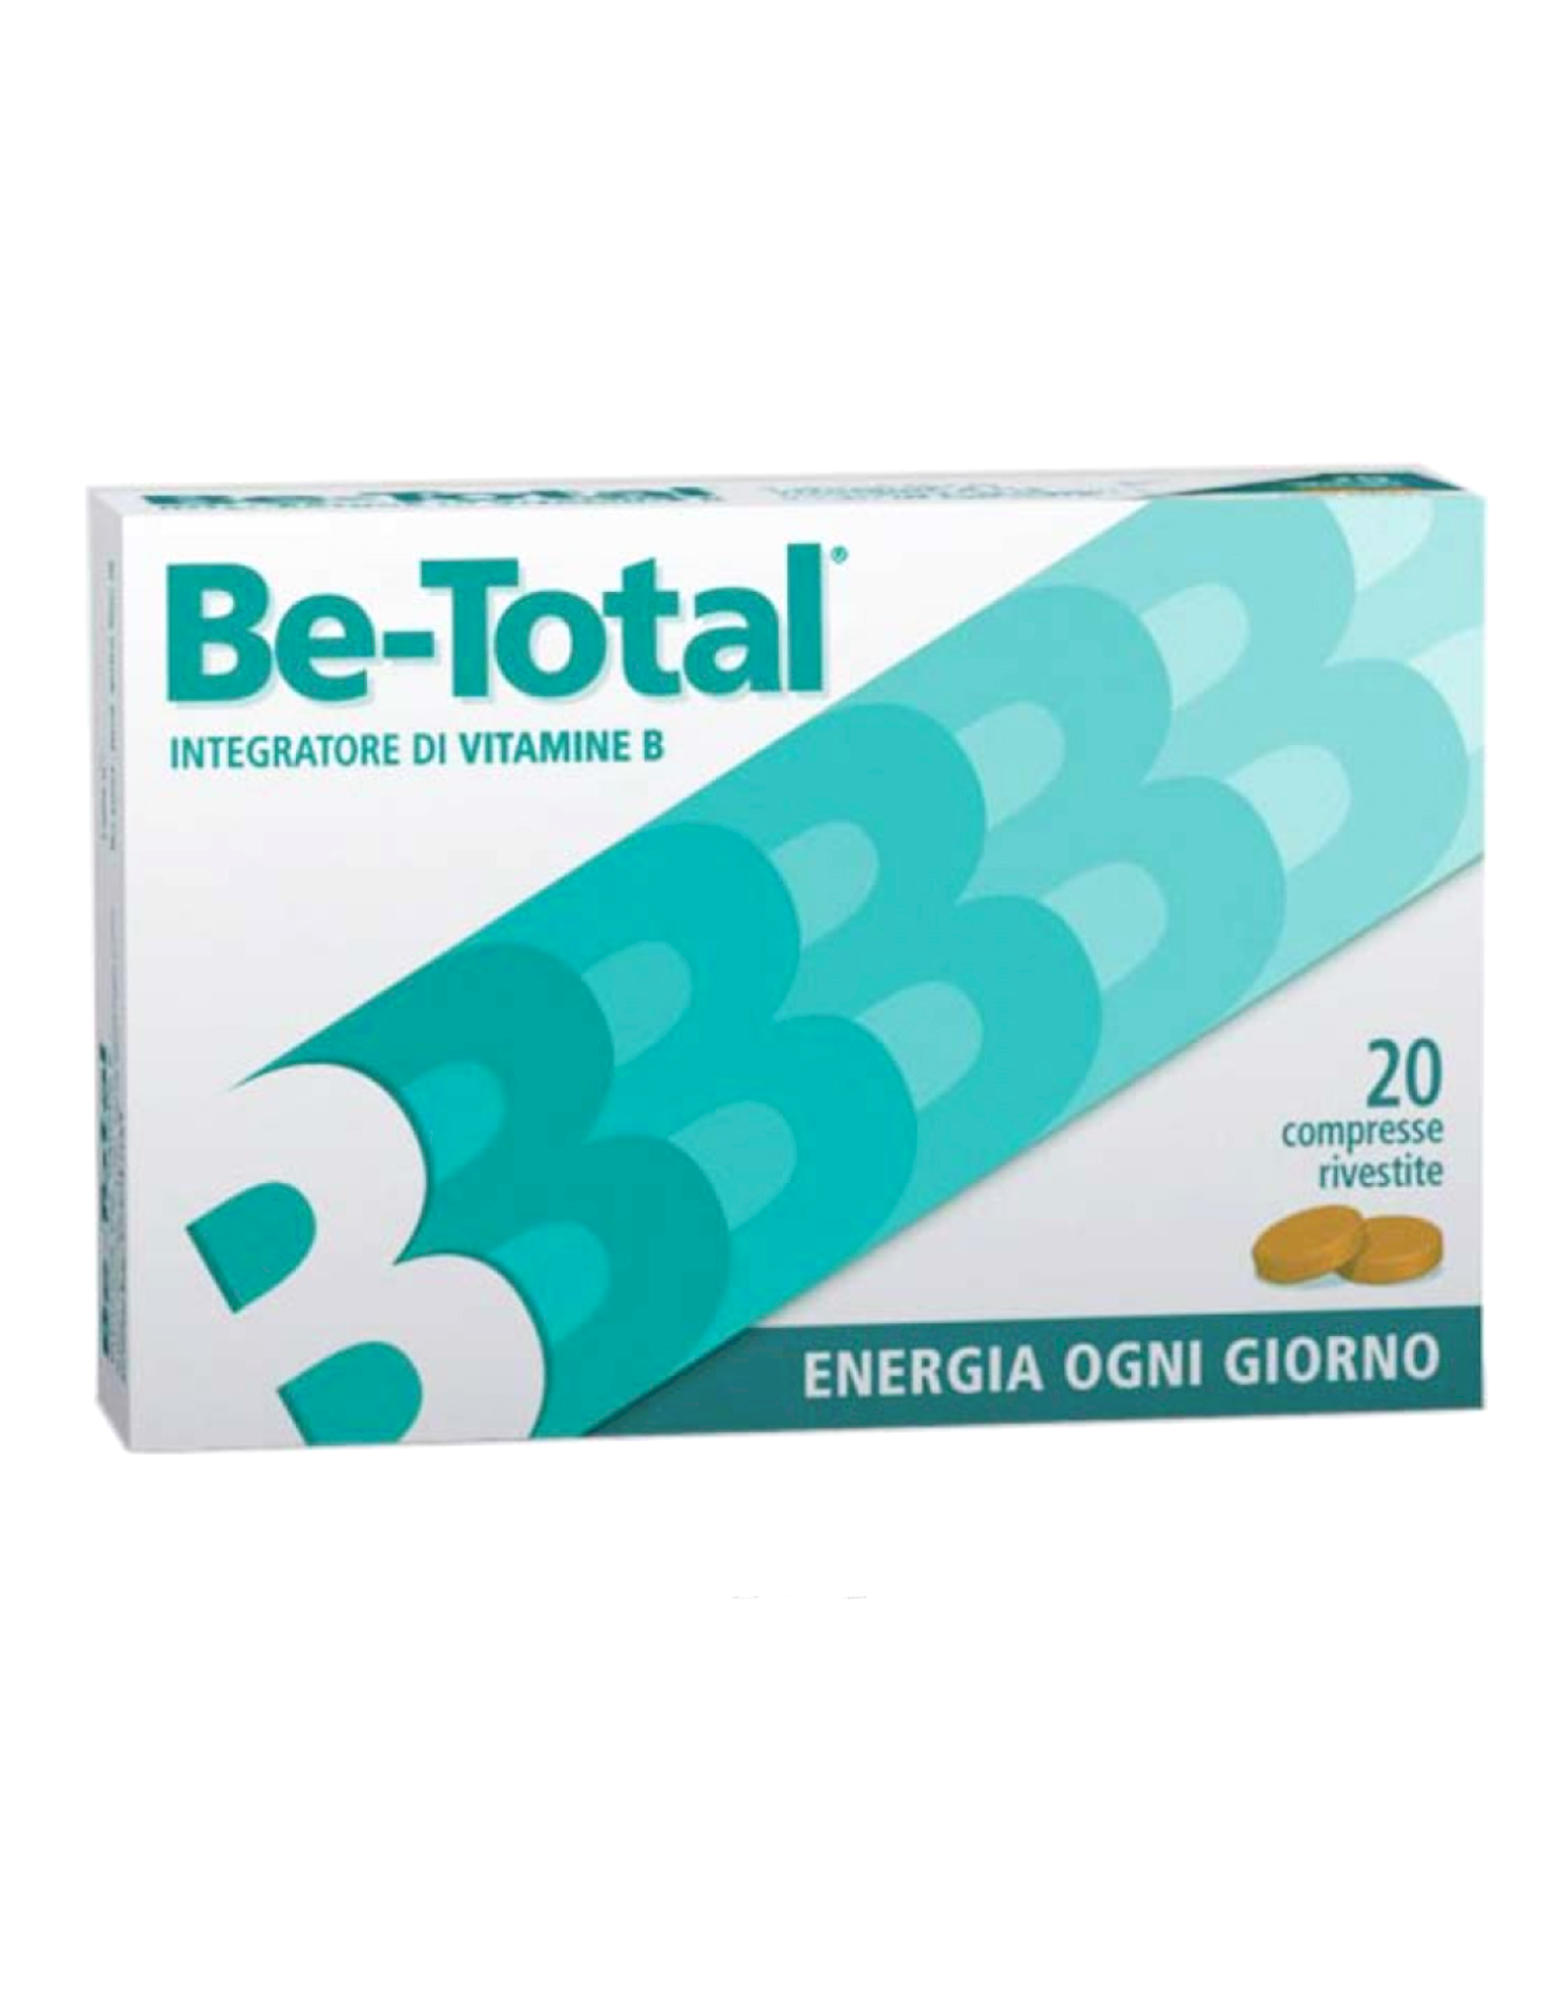 Be-Total 20 tablets